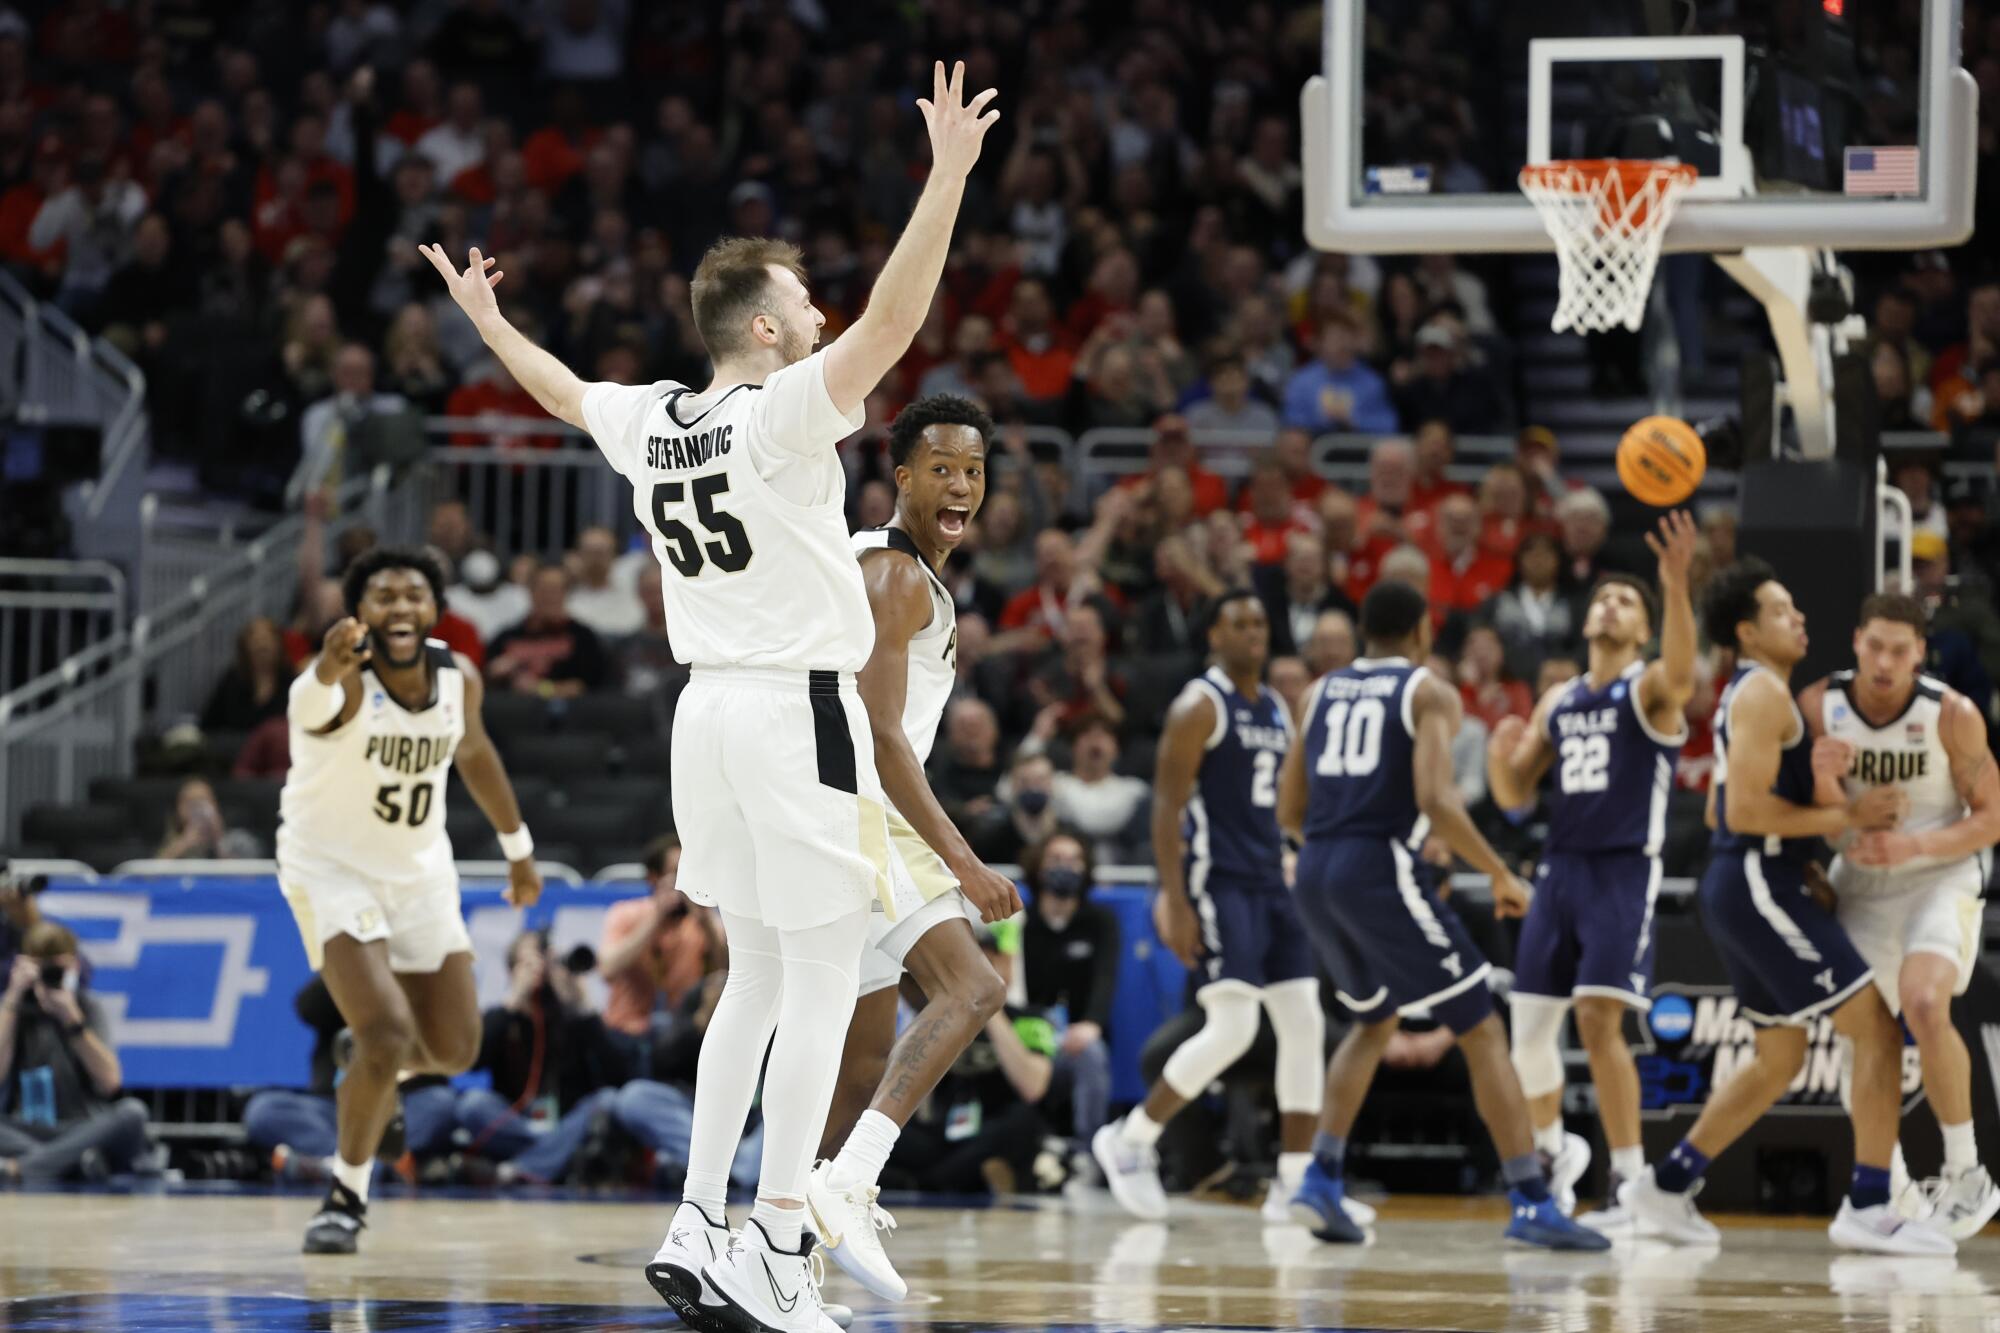 Purdue's Sasha Stefanovic raises his arms after making a three-pointer against Yale.